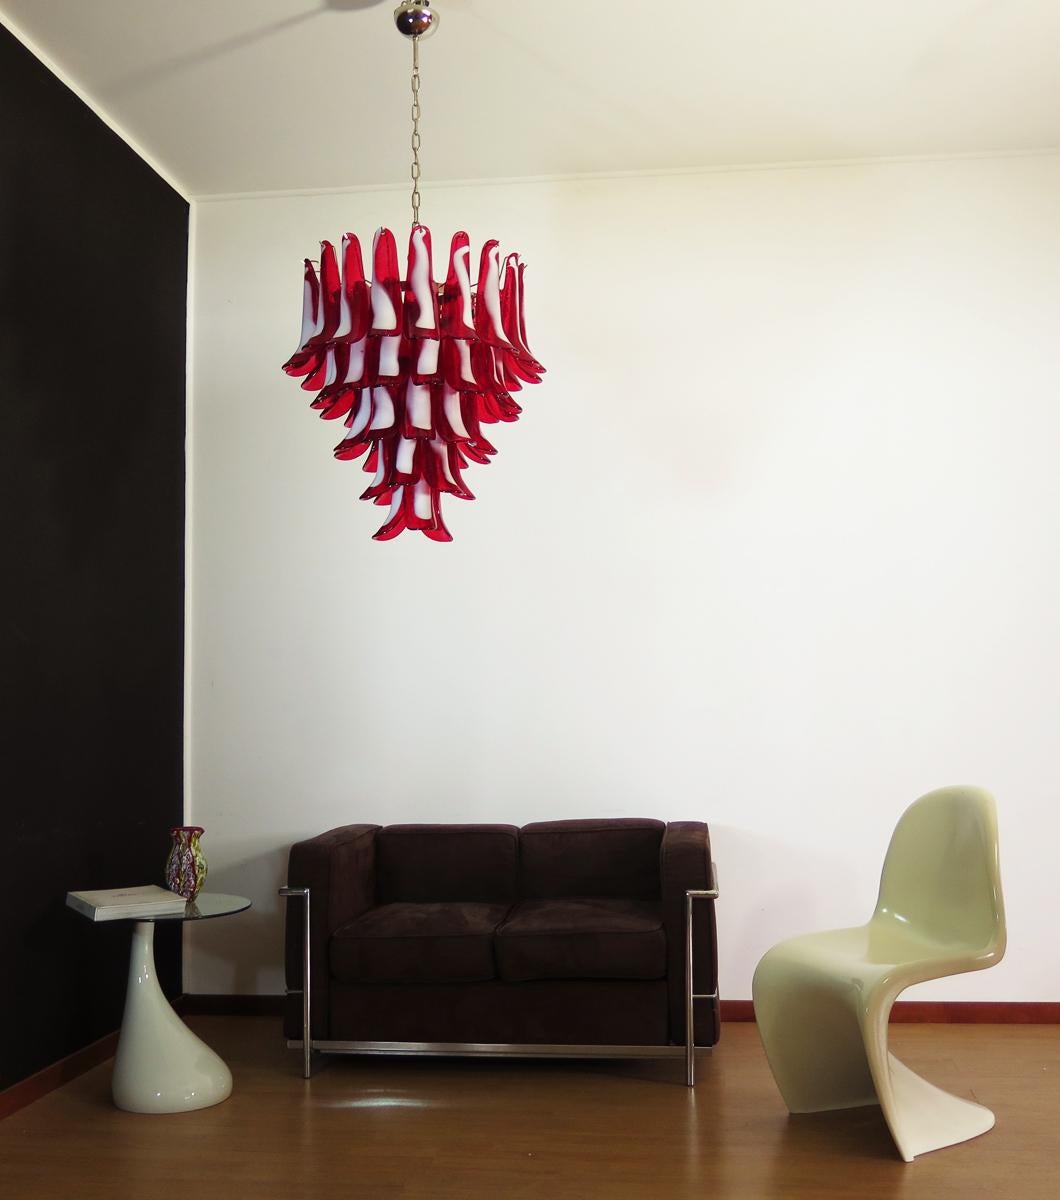 Huge Italian vintage Murano chandelier made by 52 glass petals (red and white “lattimo”) in a chrome frame.
Period: Late 20th century
Dimensions: 55.10 inches (140 cm) height with chain; 29.50 inches (75 cm) height without chain; 26 inches (66 cm)